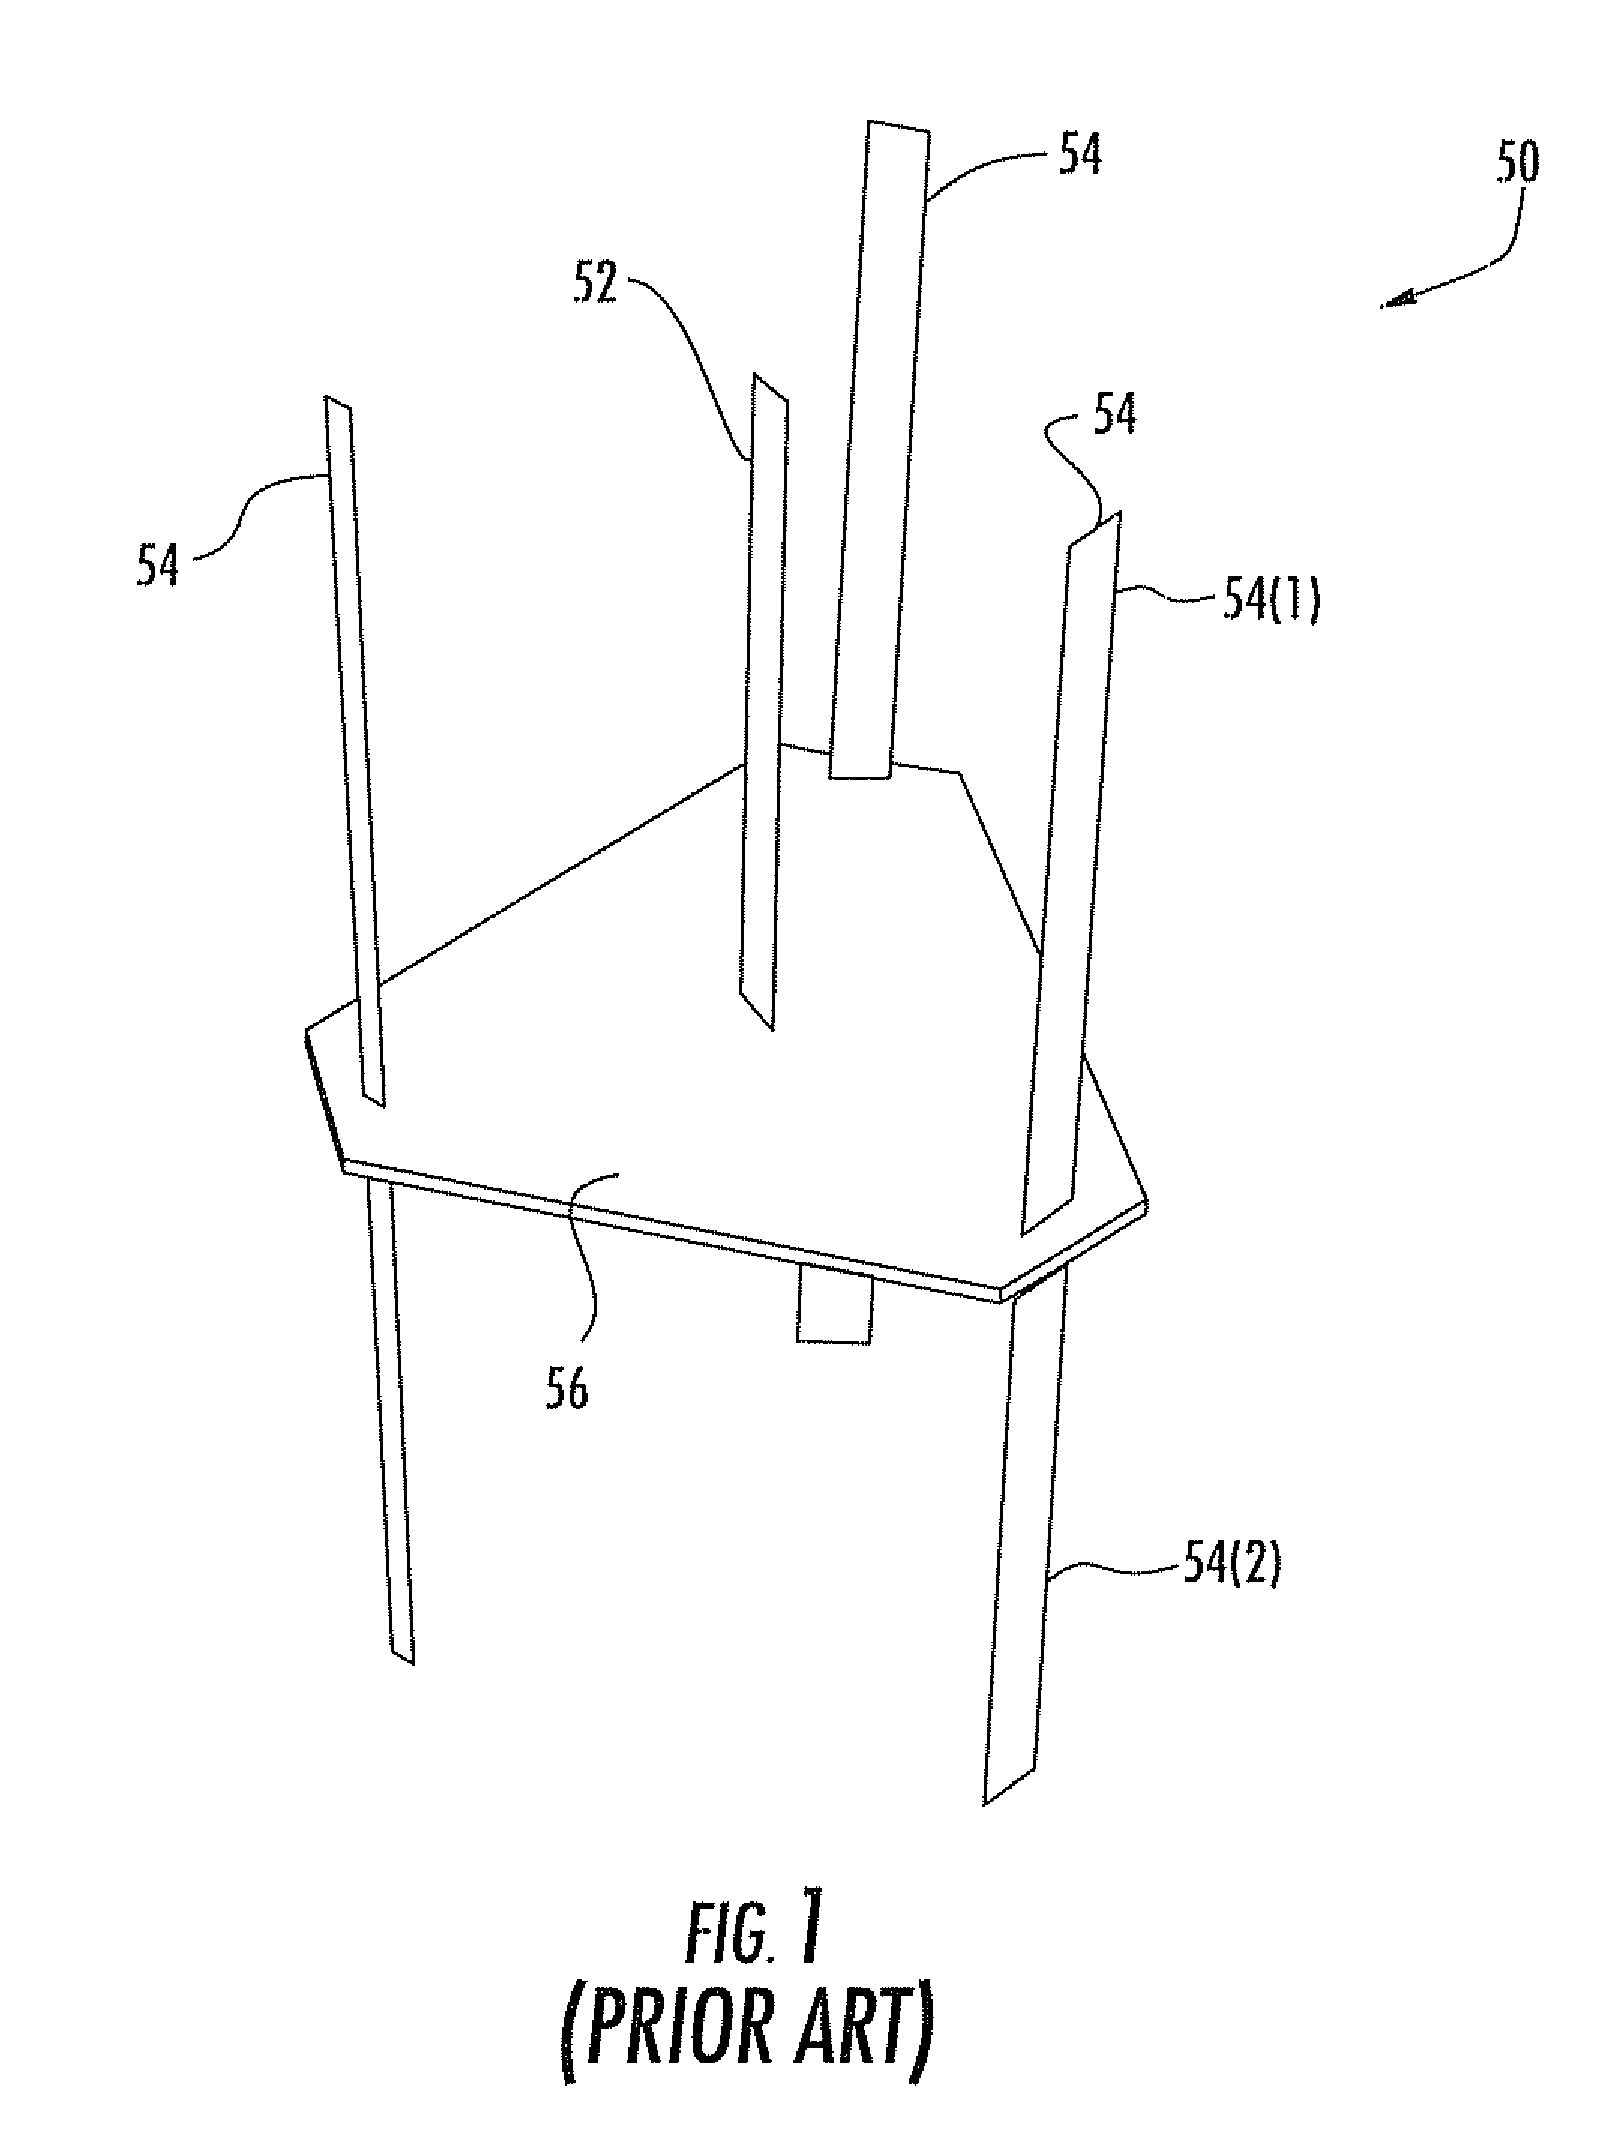 Three-dimensional antenna fabrication from a two-dimensional structure